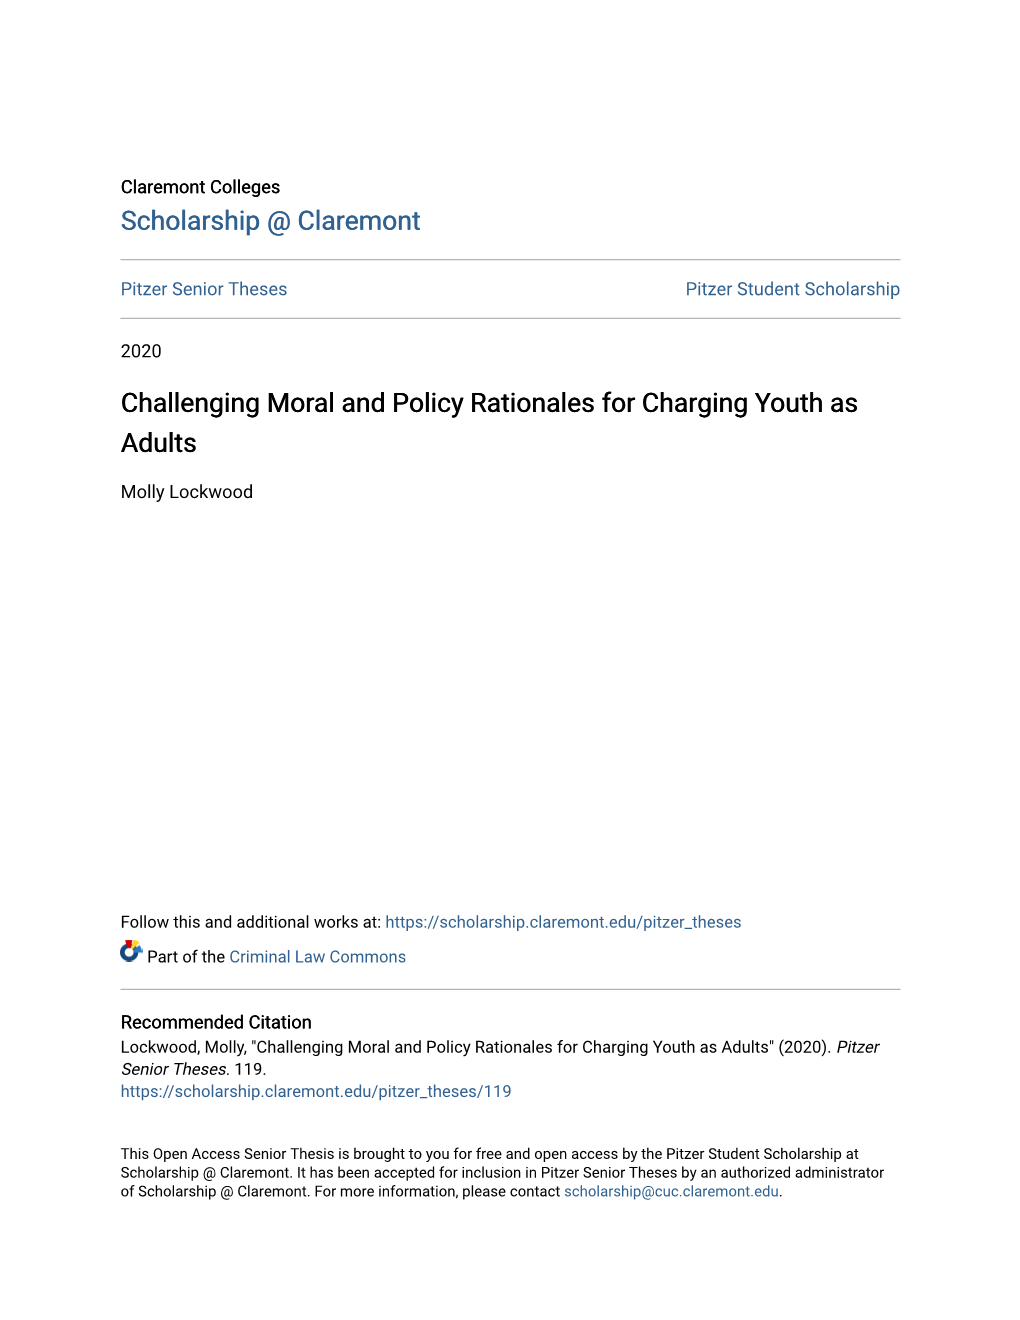 Challenging Moral and Policy Rationales for Charging Youth As Adults